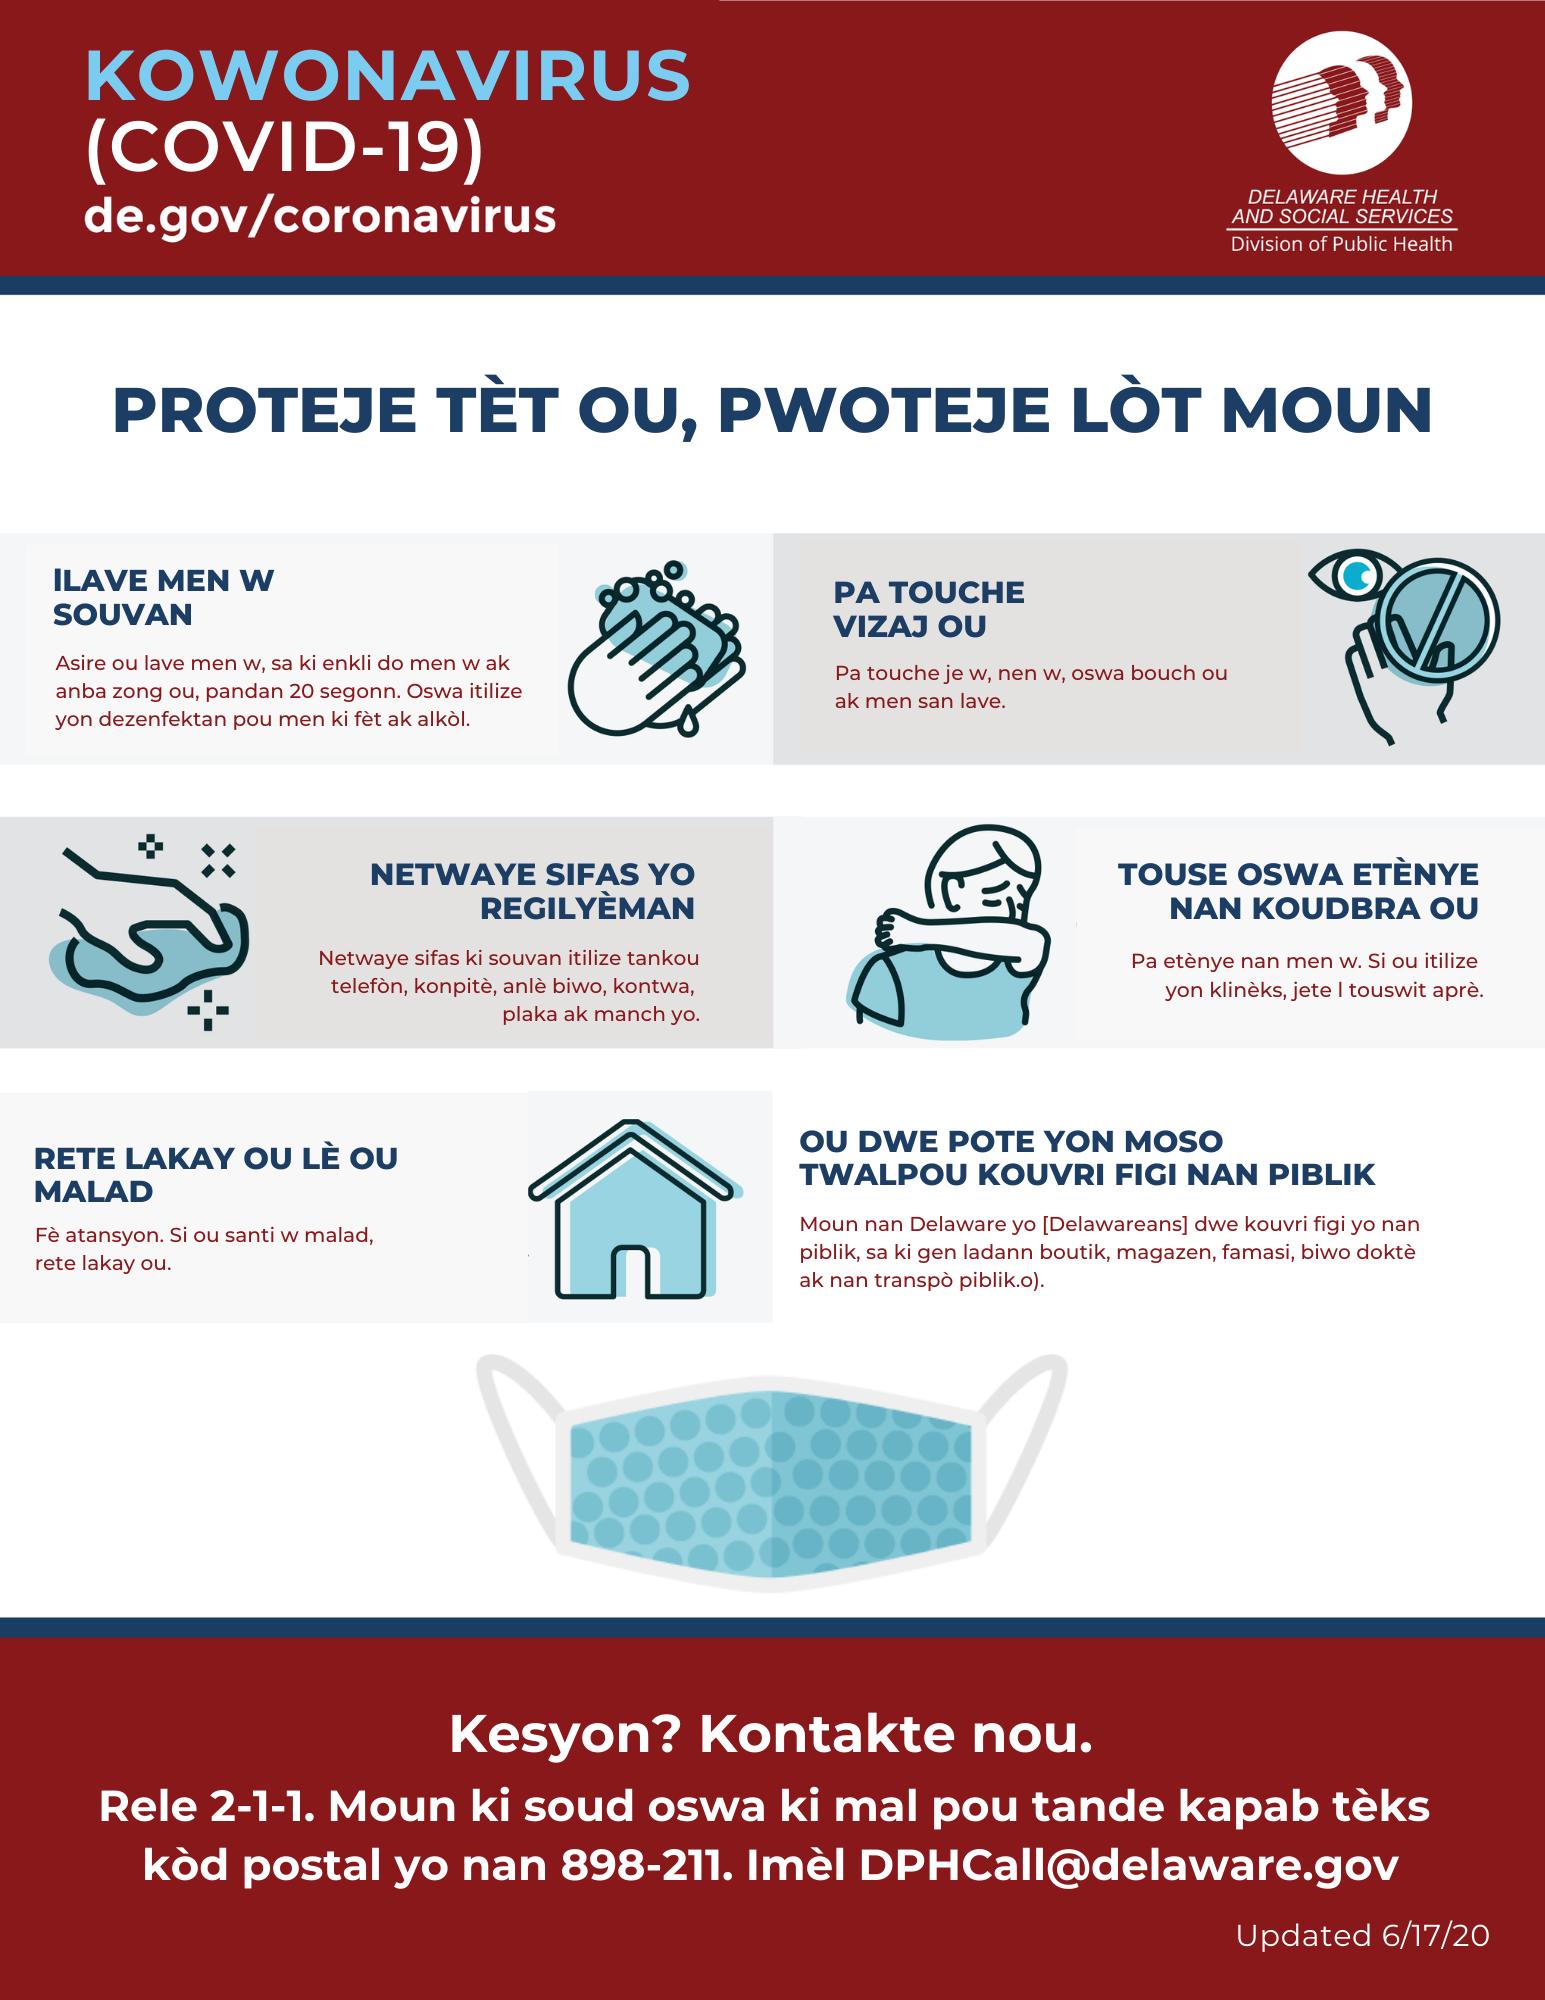 Protect Yourself and Other - Haitian Creole Version